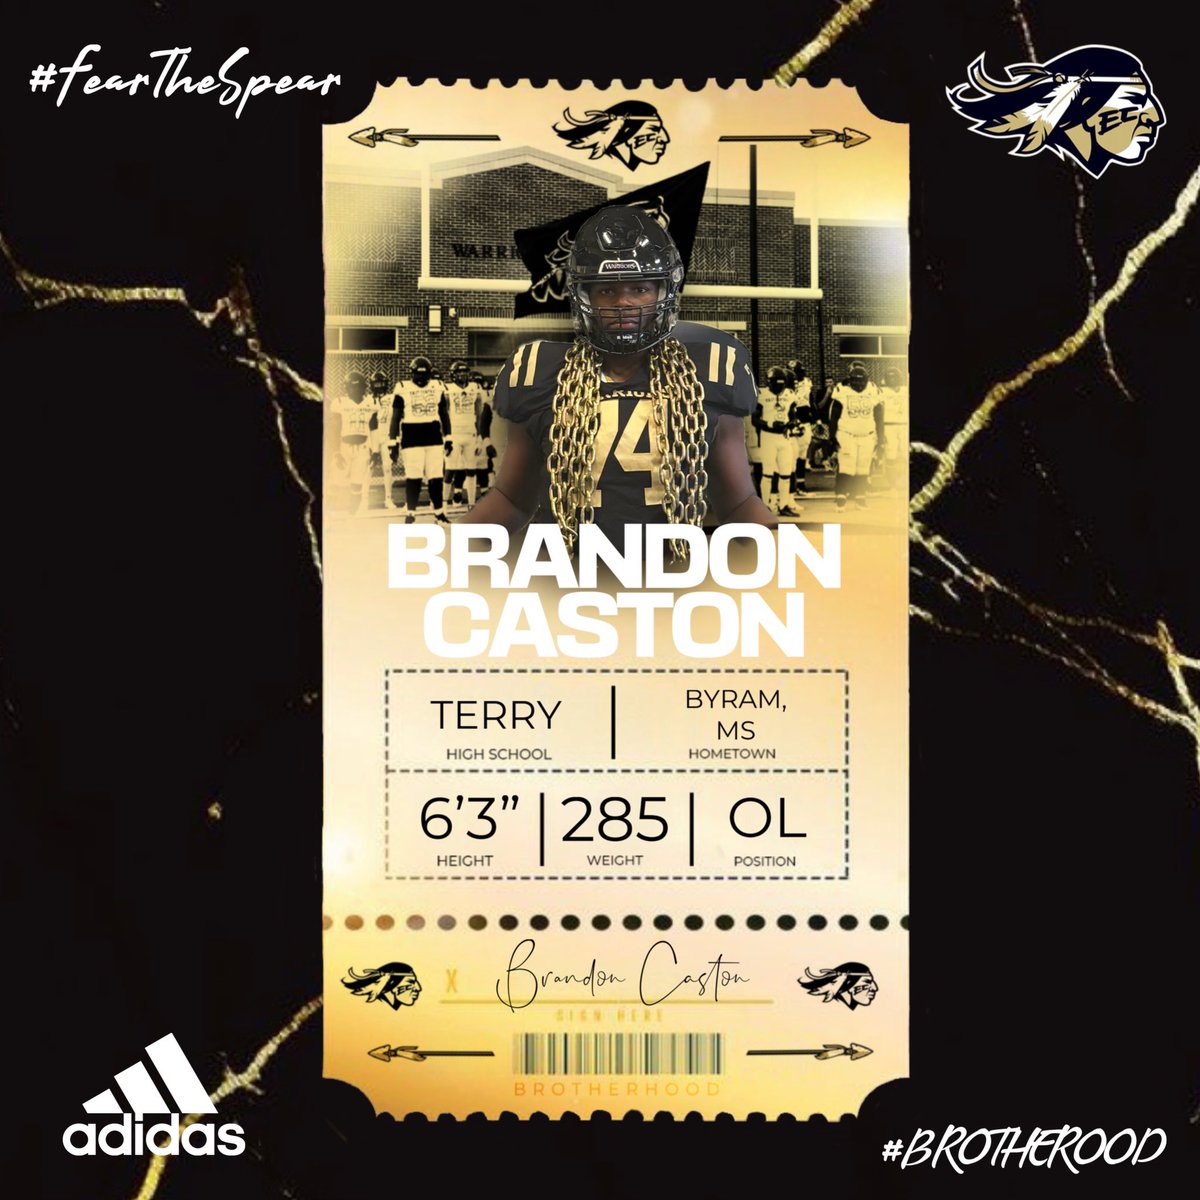 BIG TIME OL from Terry!! @Brandon_Caston1 has punched his ticket to join the Brotherhood!! #BROTHERHOOD X #FearTheSpear